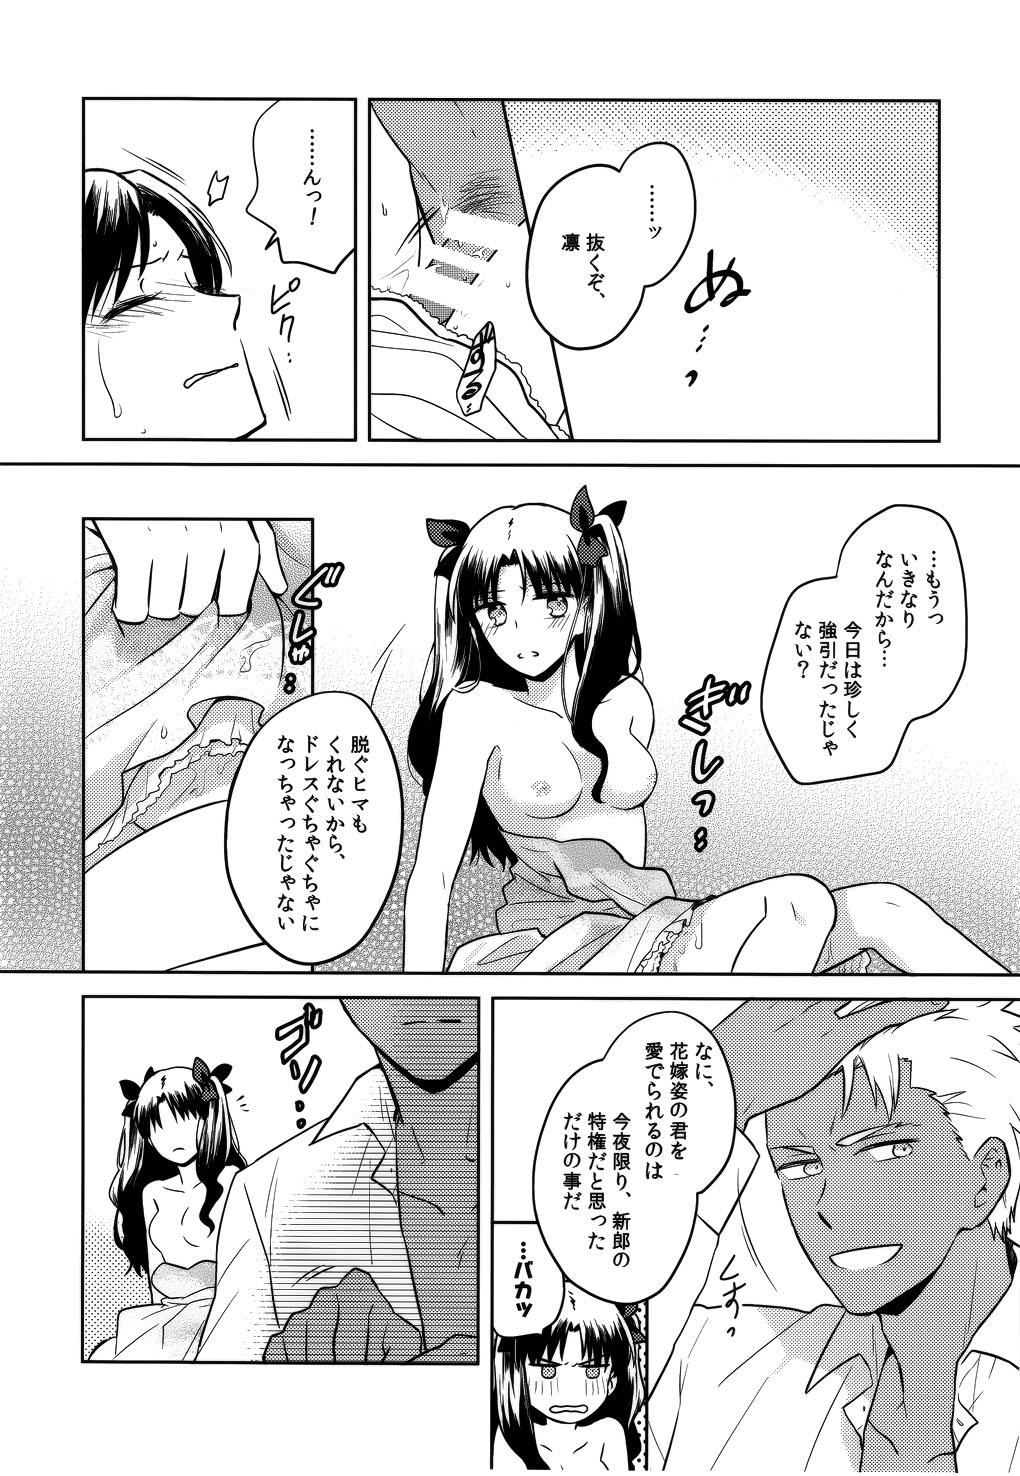 Safada RED×RED - Fate stay night Chick - Page 5